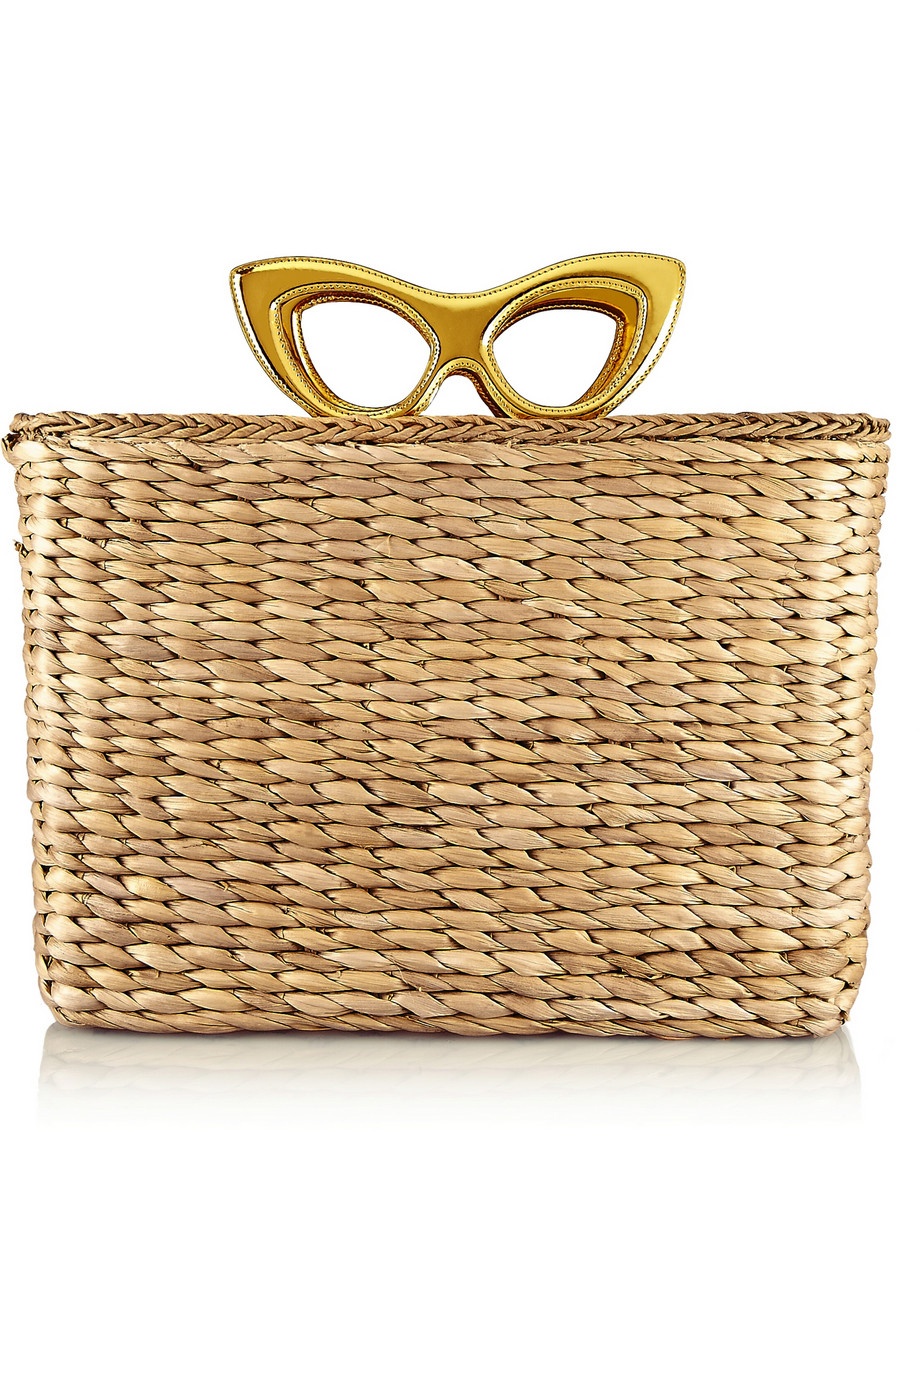 Charlotte olympia Sunny Basket Leathertrimmed Raffia Tote in Metallic ...